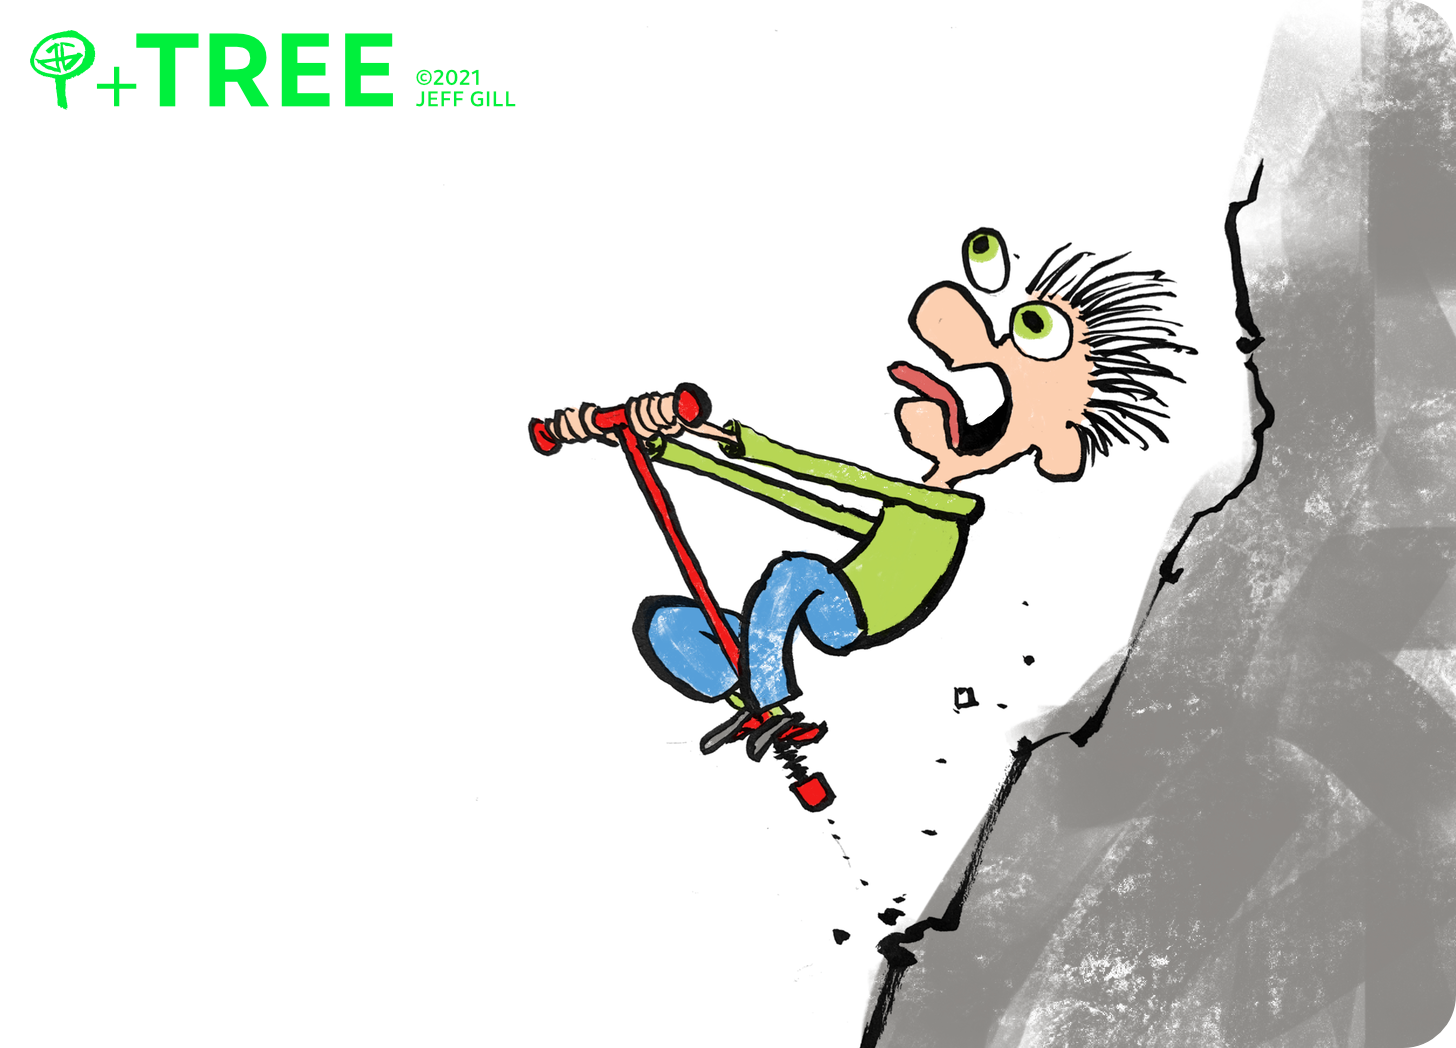 A distressed man rides a pogo stick down a near-vertical rocky slope